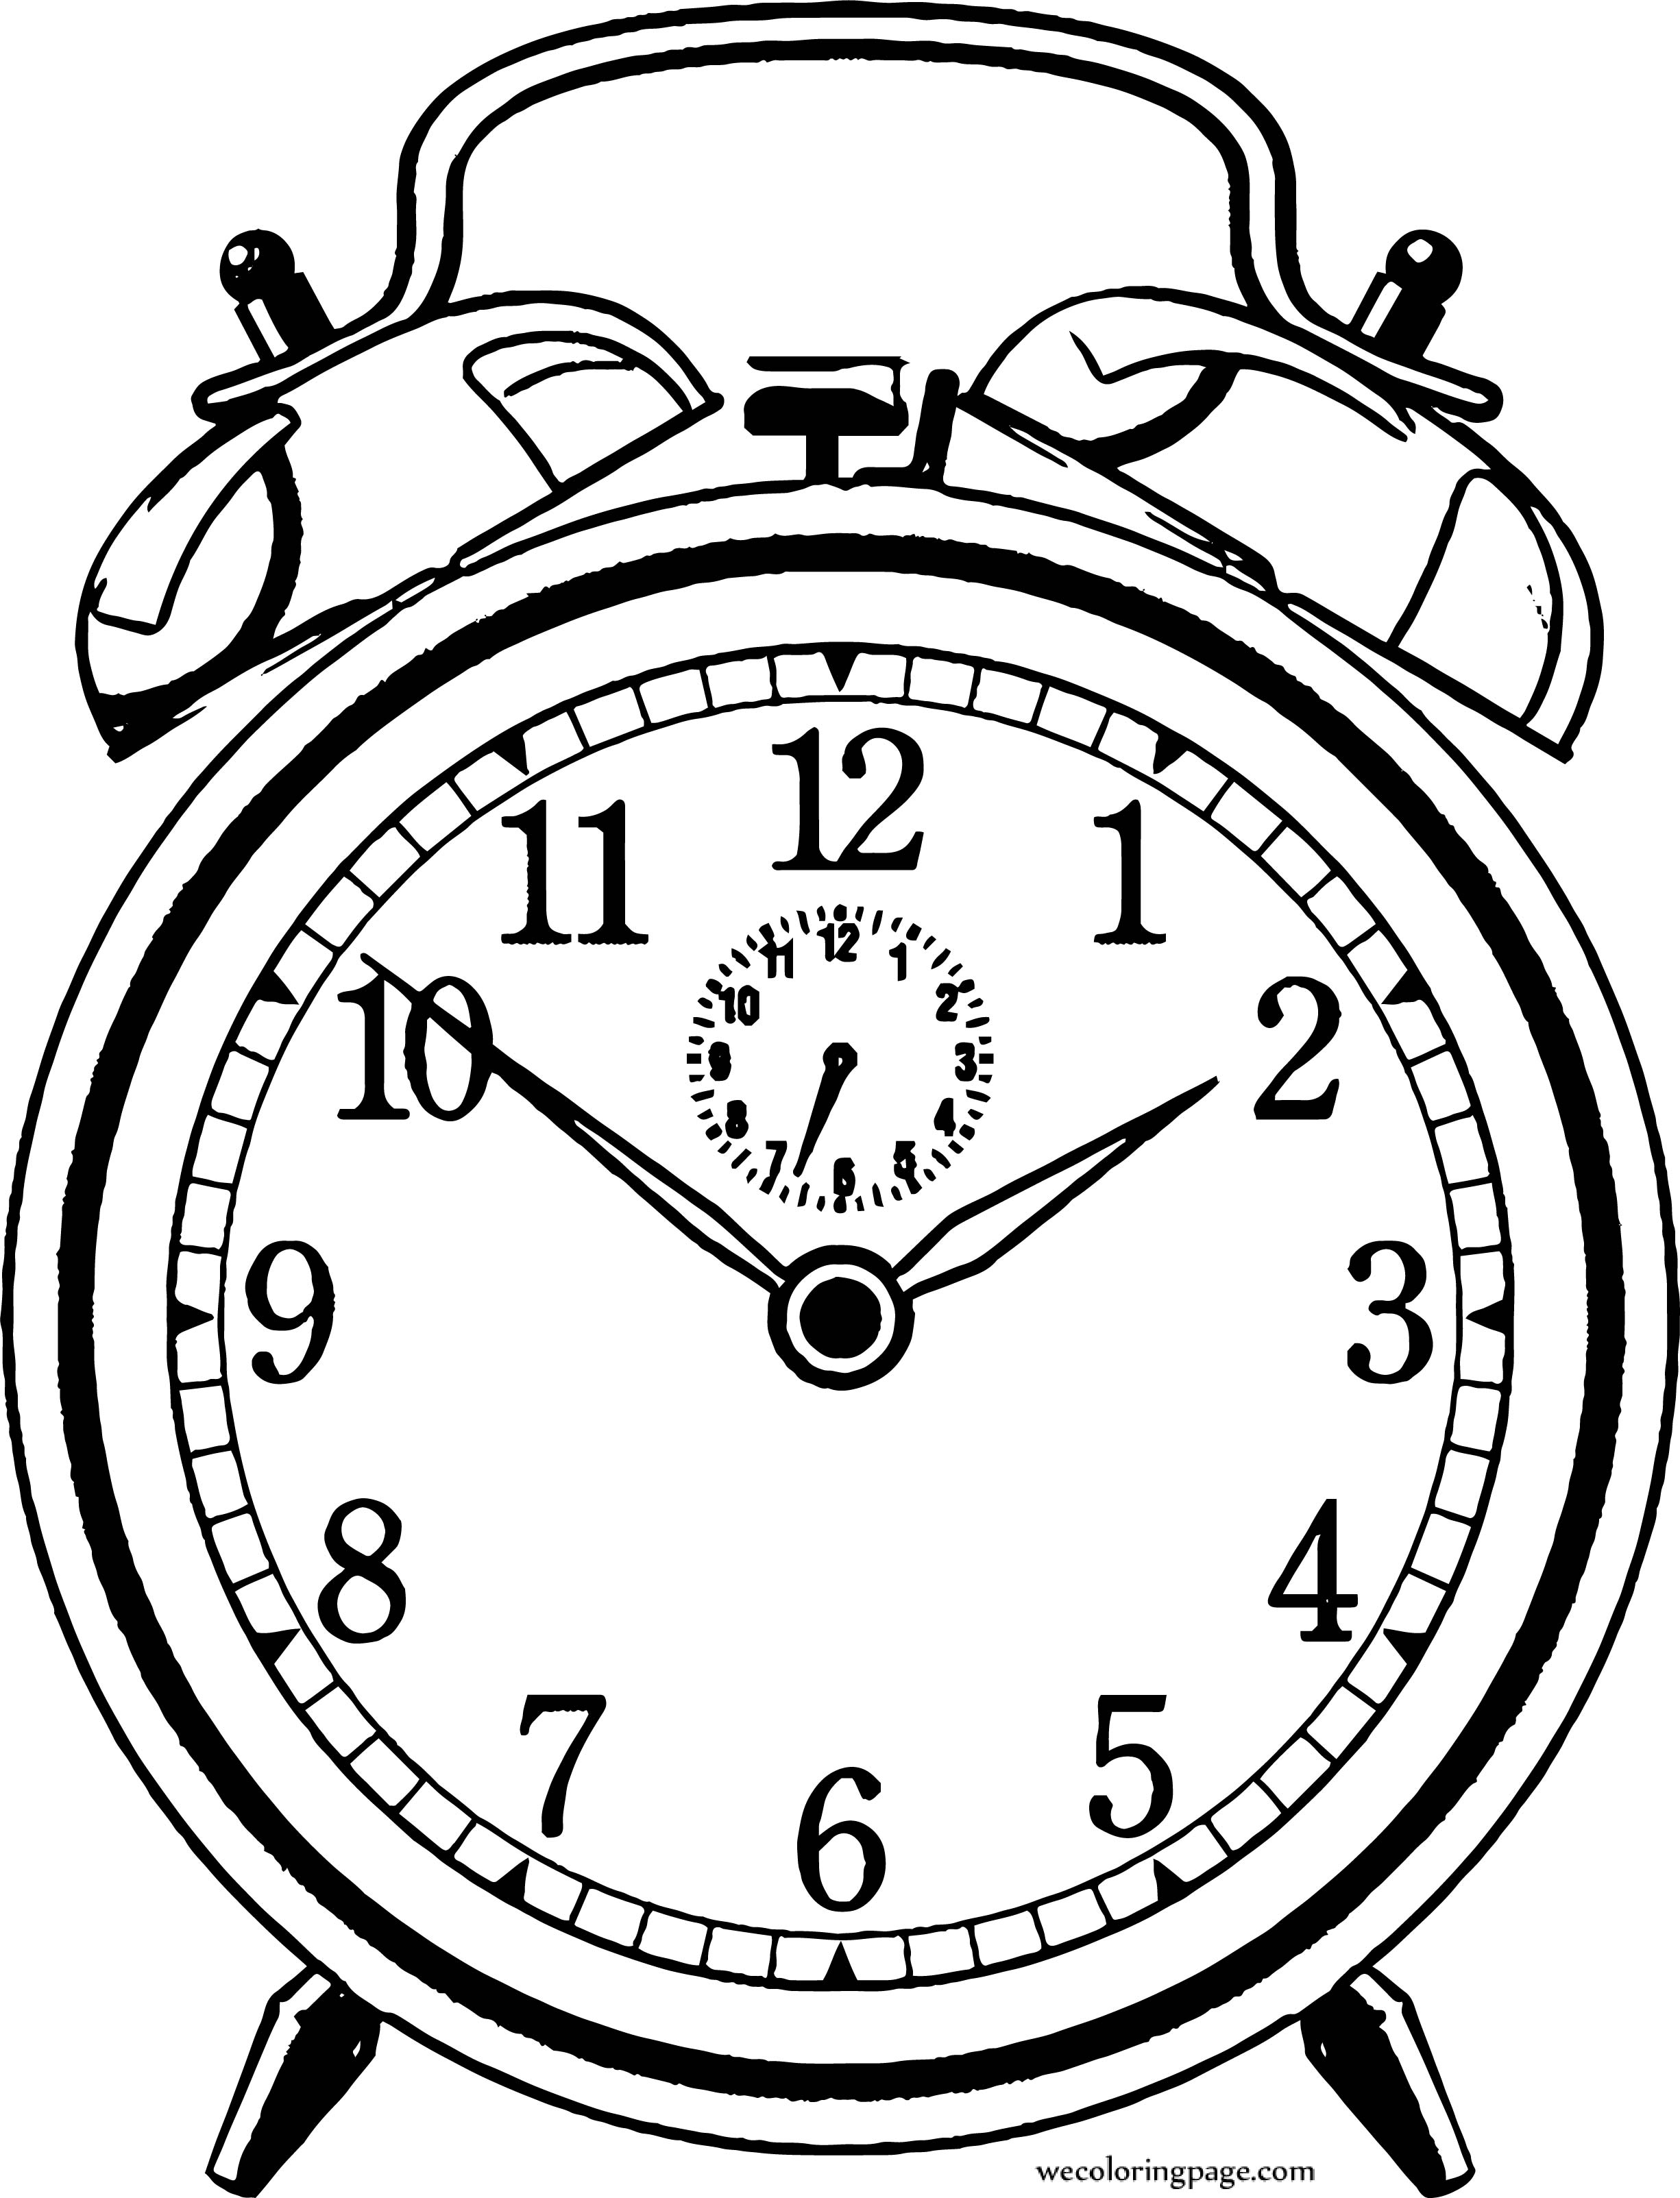 free-old-clock-alarm-coloring-page-wecoloringpage